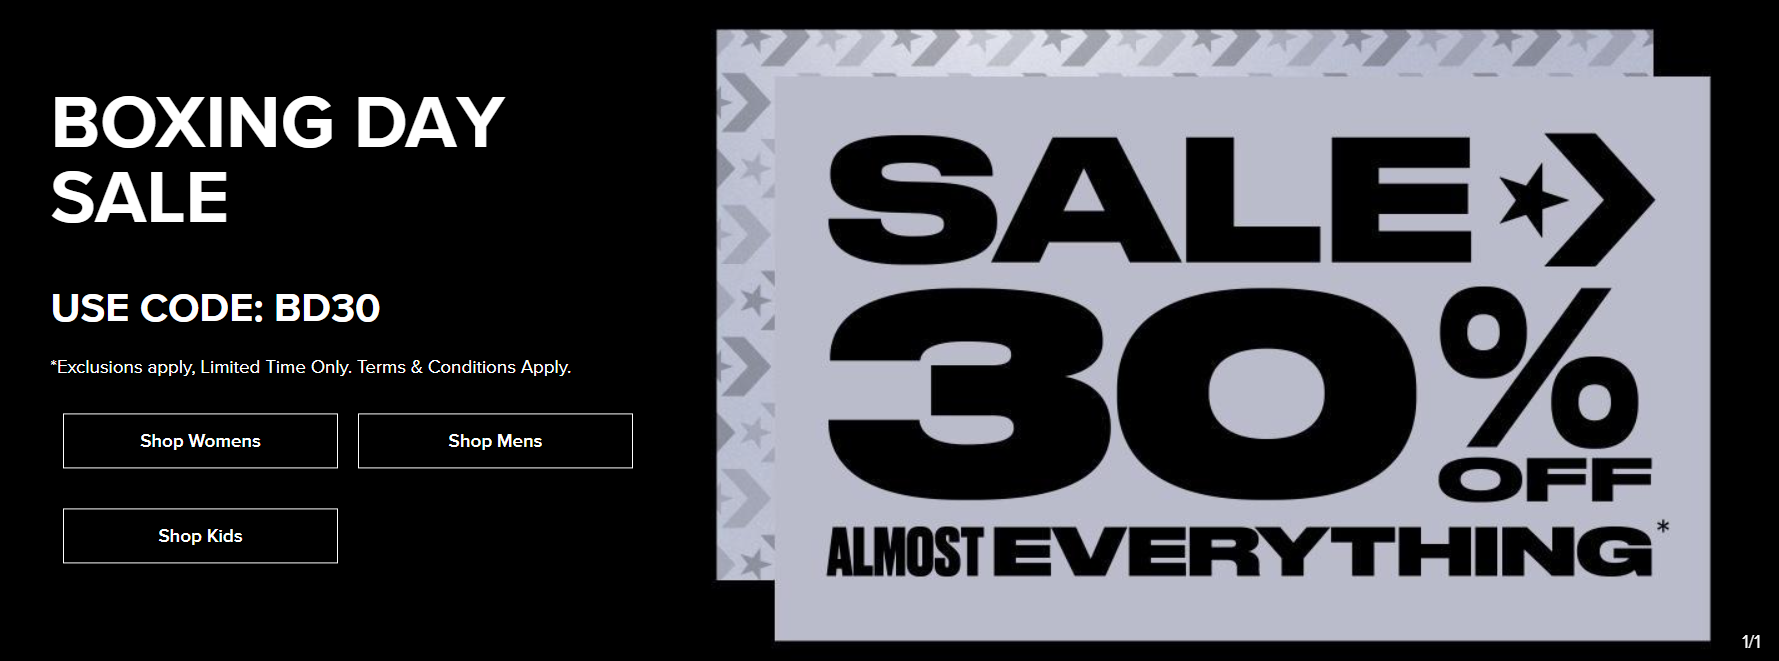 Converse Boxing Day extra 30% OFF on almost everything with promo code